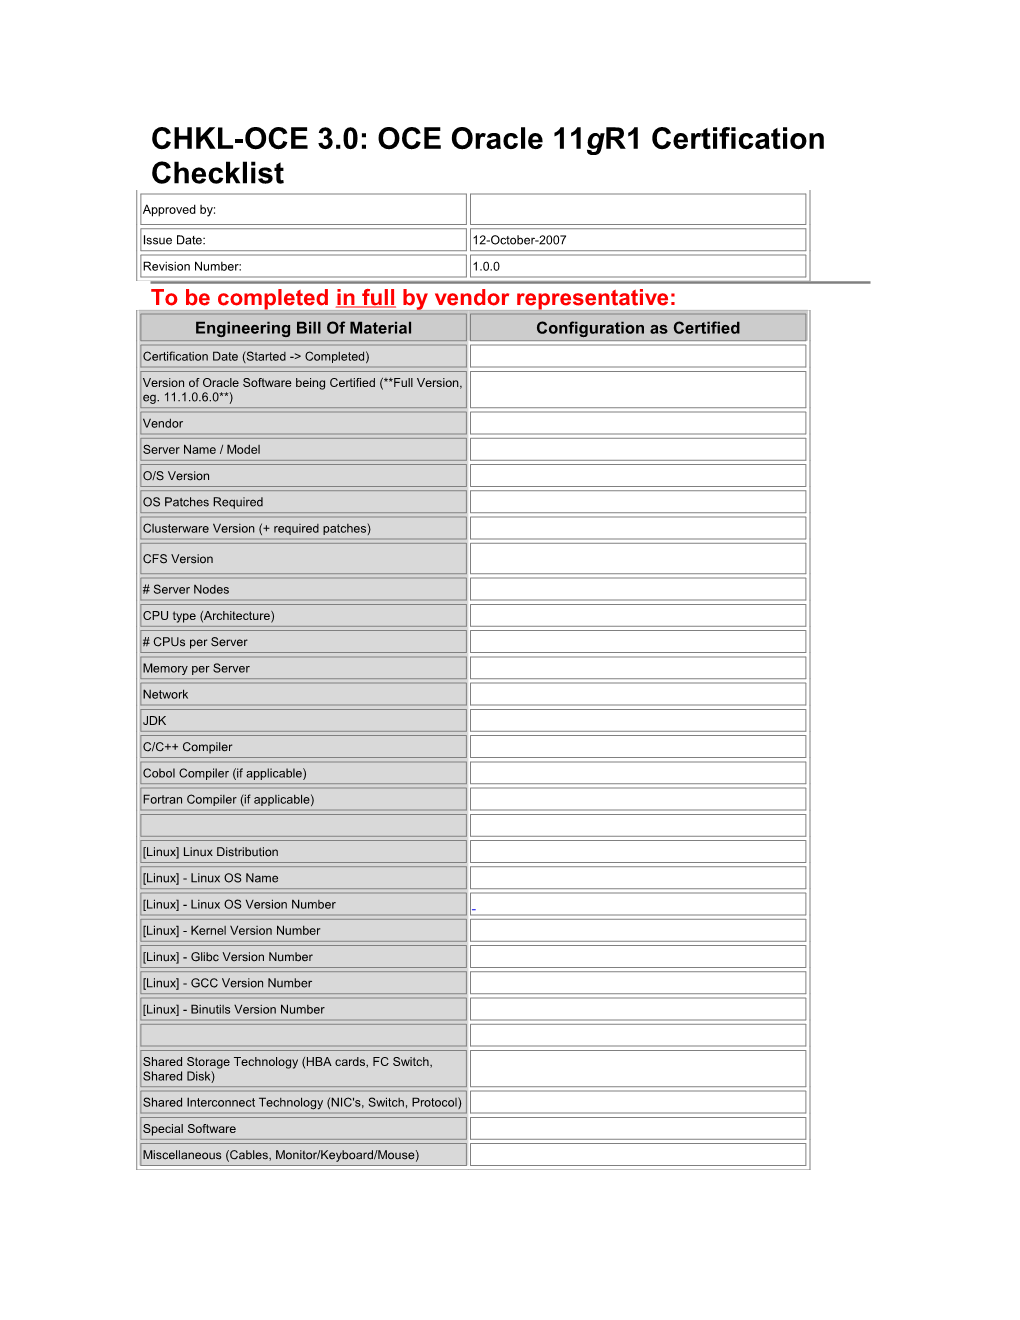 OCE 1.0: Certification Kit Checklist for Oracle10g RAC